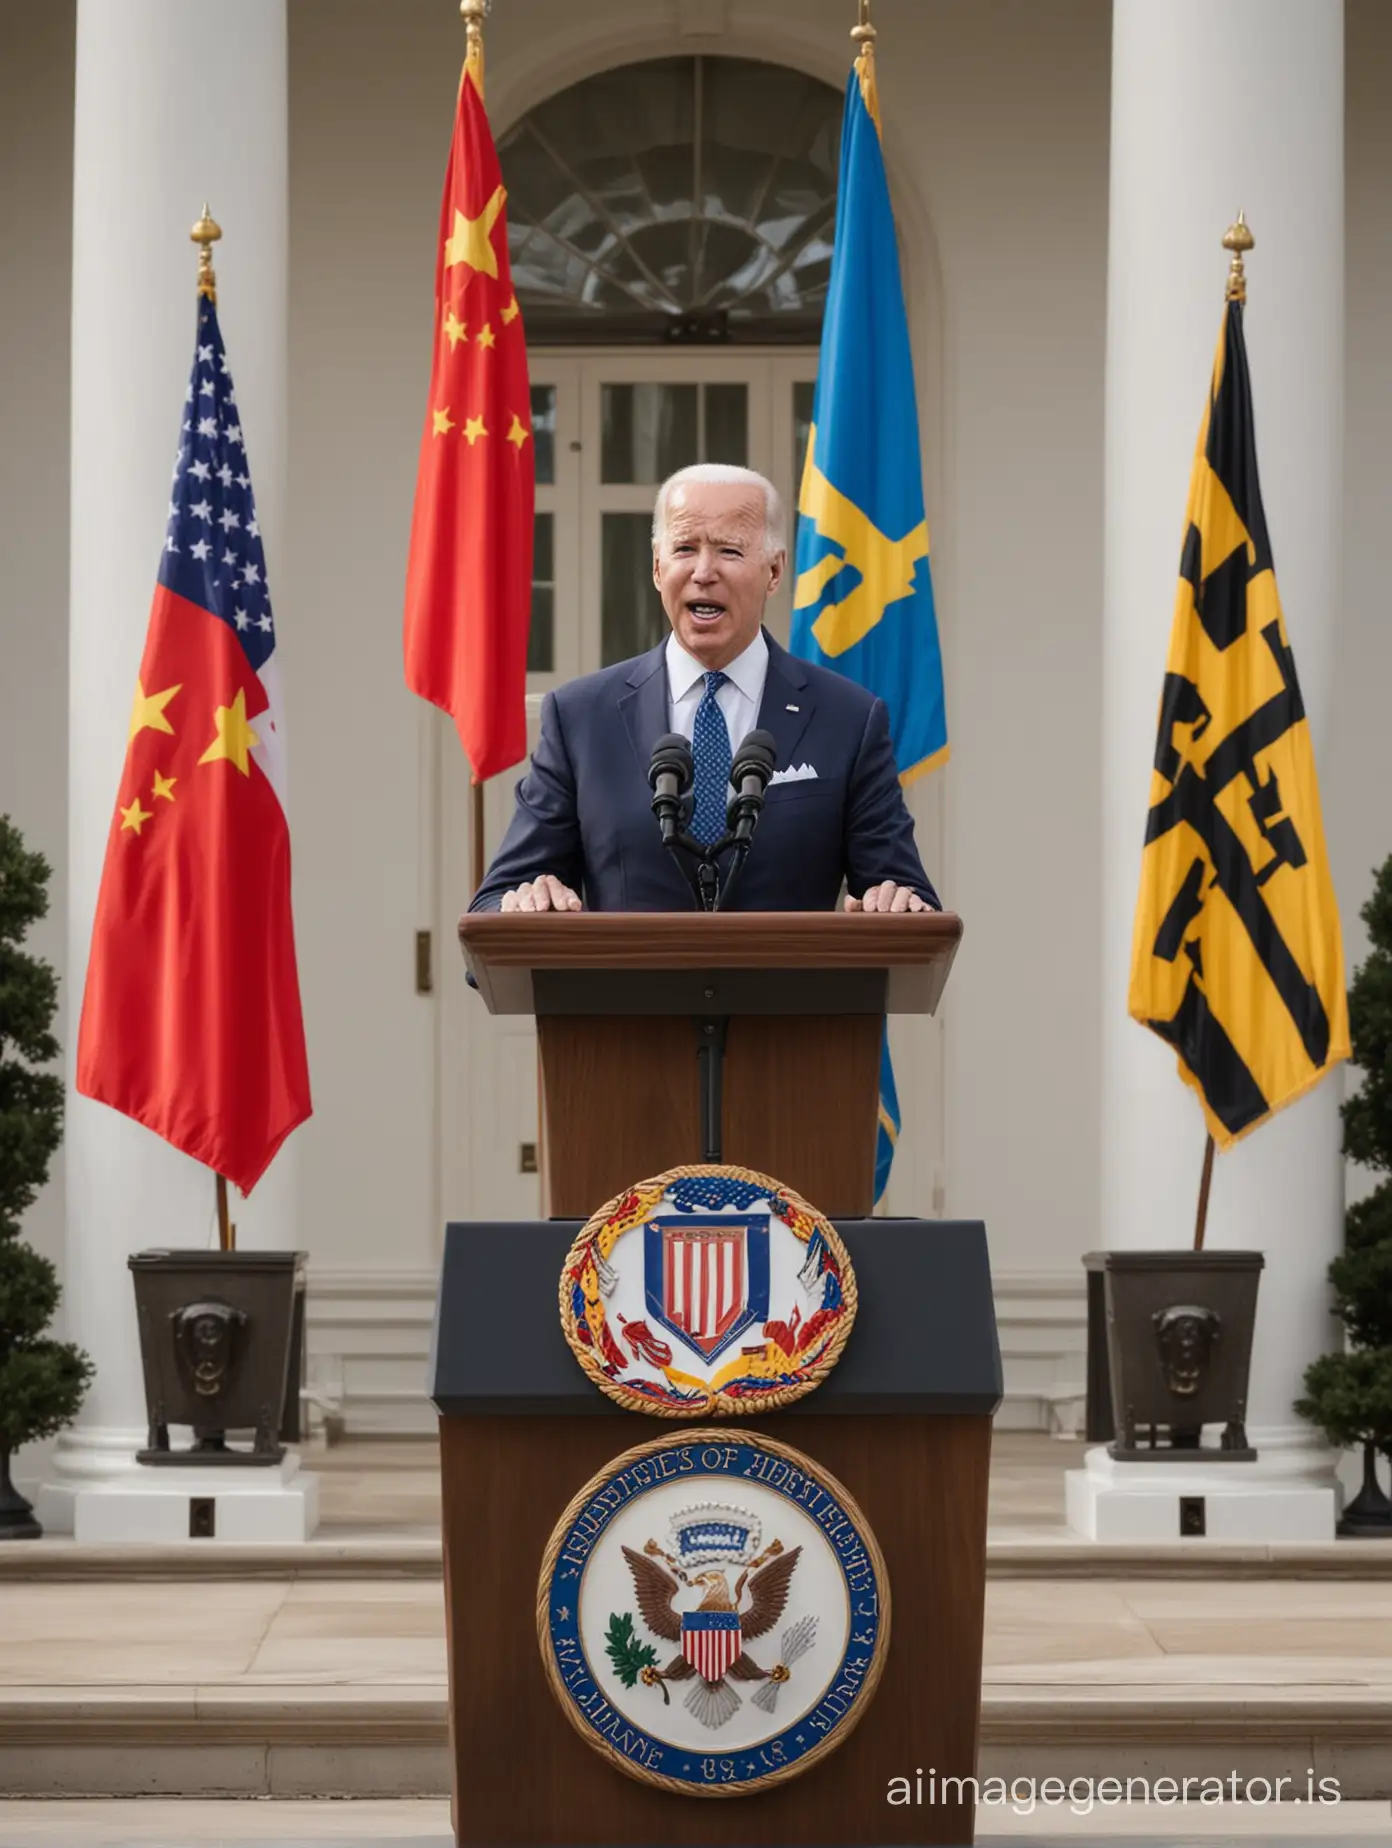 Joe-Biden-Speech-at-White-House-with-Flags-and-Controversy